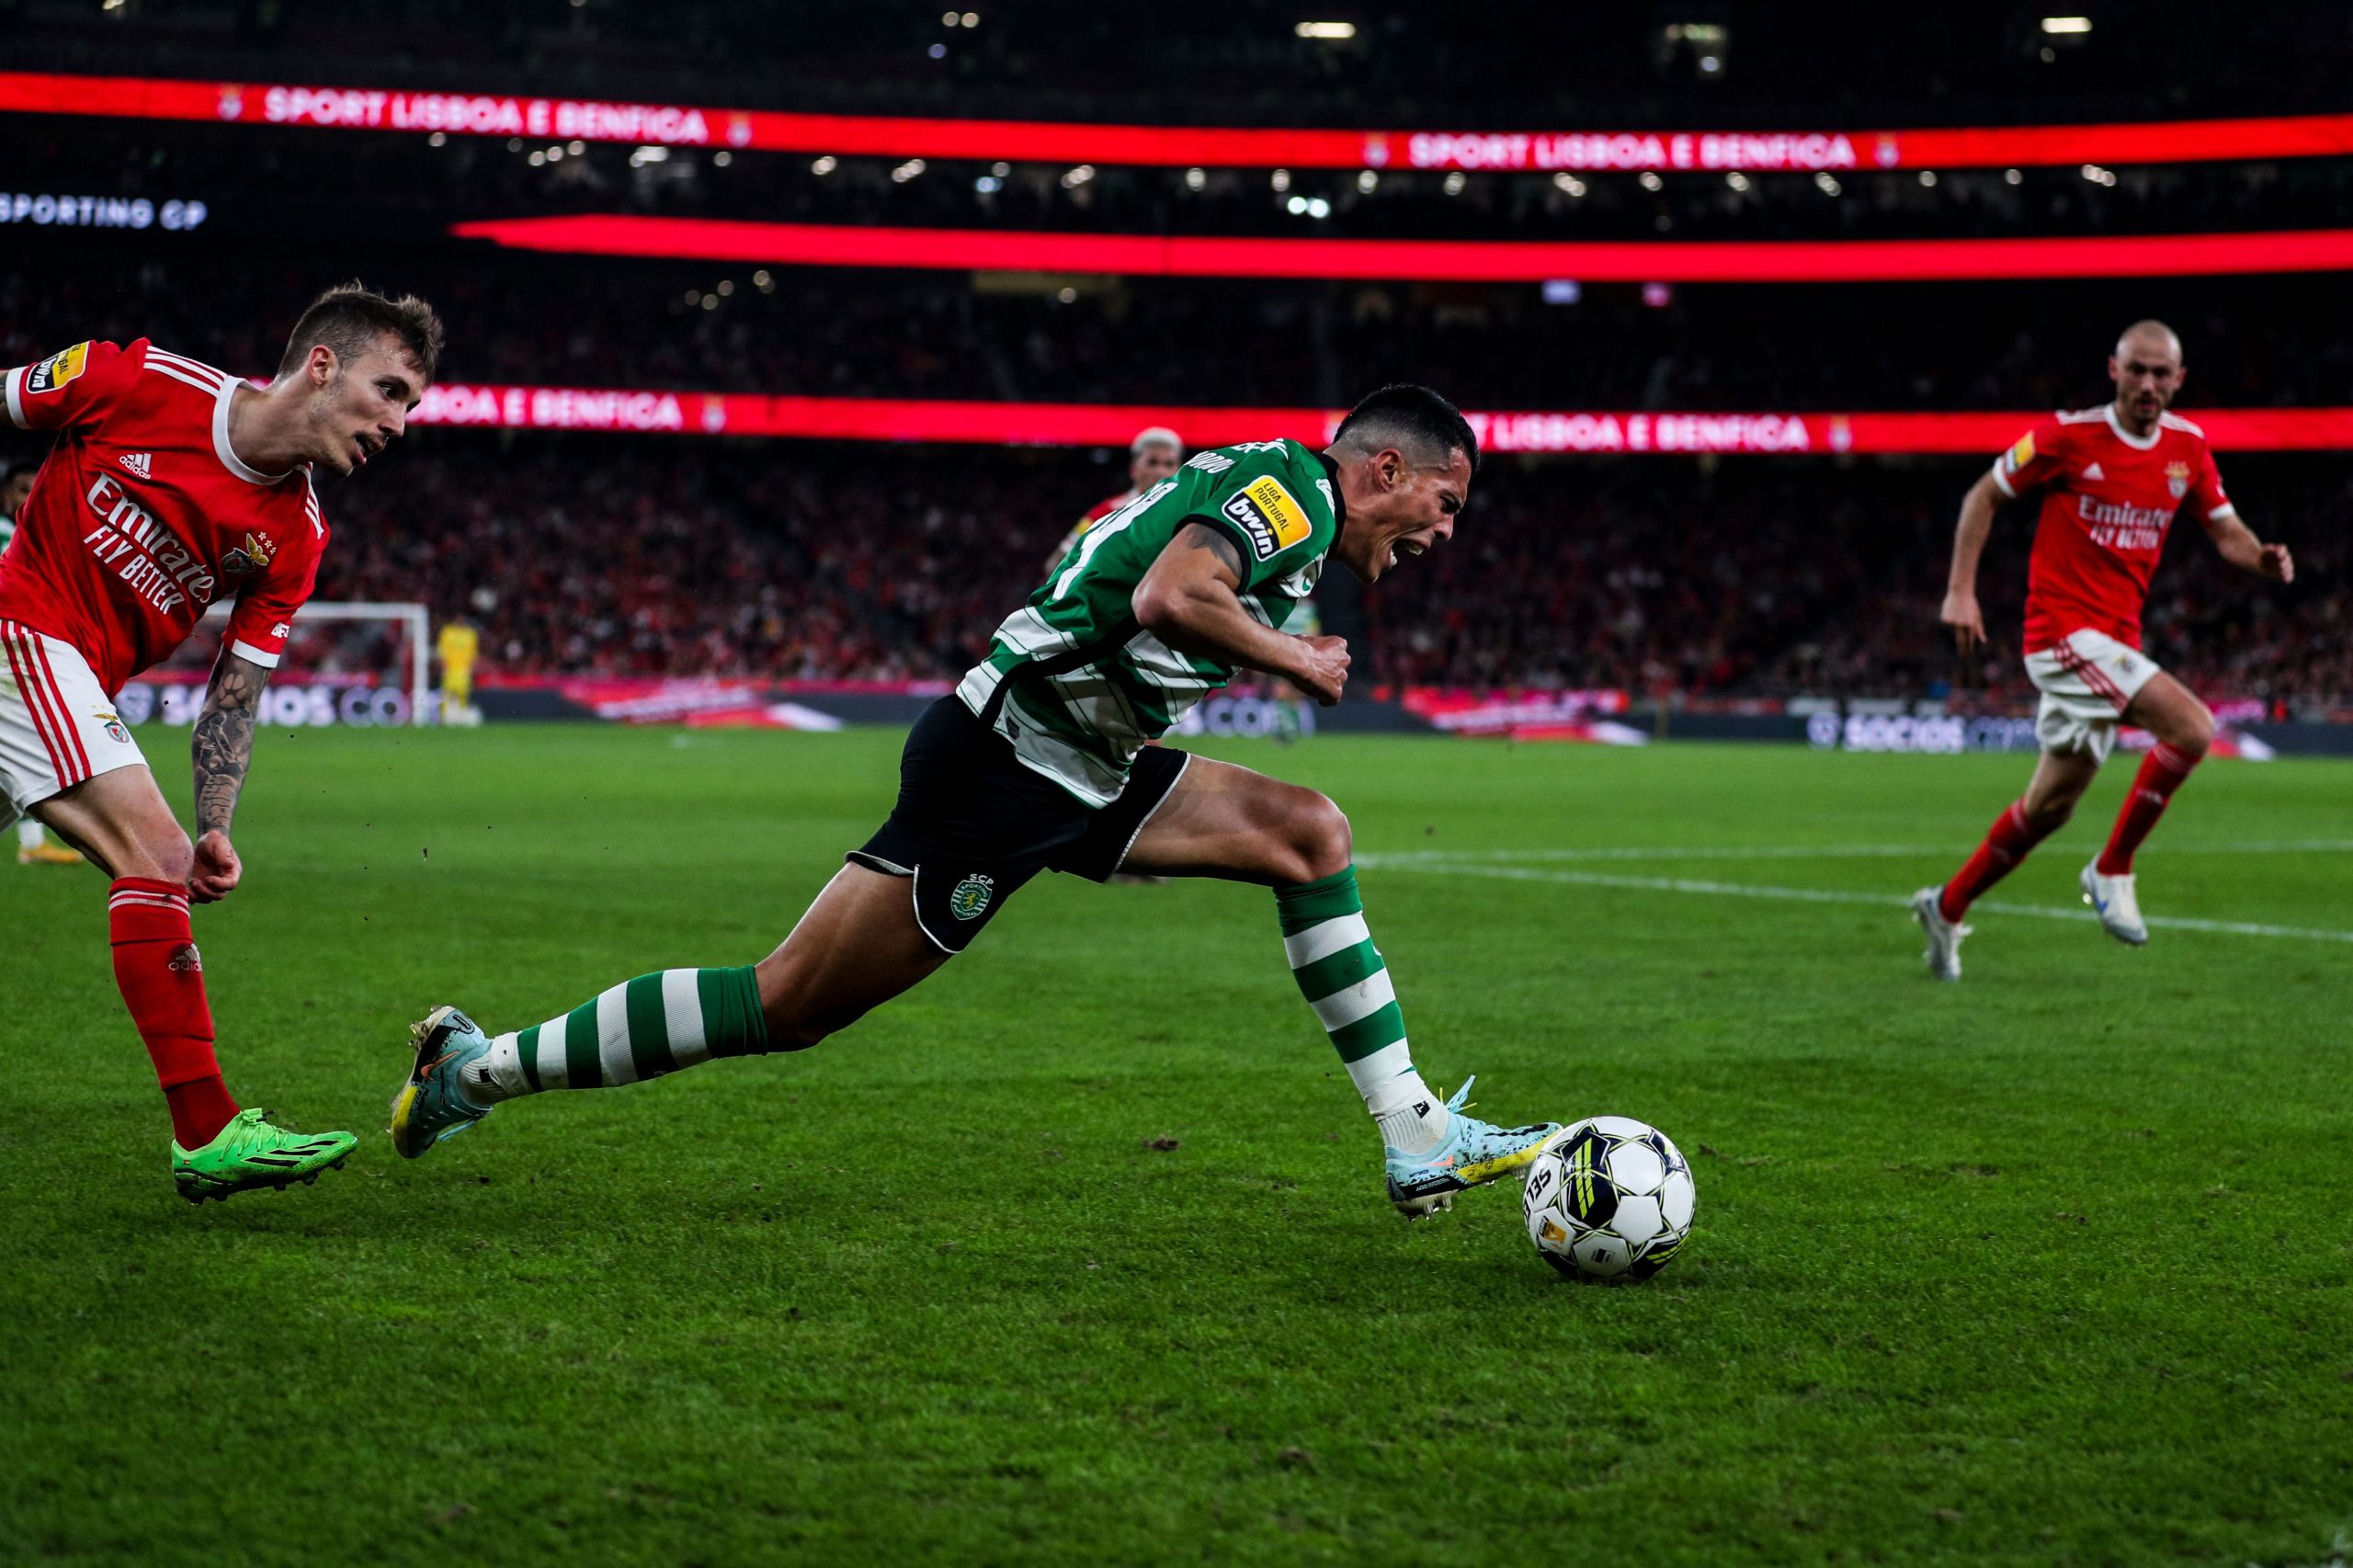 Benfica's Spanish midfielder Alex Grimaldo (L) vies with Sporting's Spanish midfielder Pedro Porro during the Portuguese League football match between SL Benfica and Sporting CP at the Luz stadium in Lisbon on January 15, 2023.